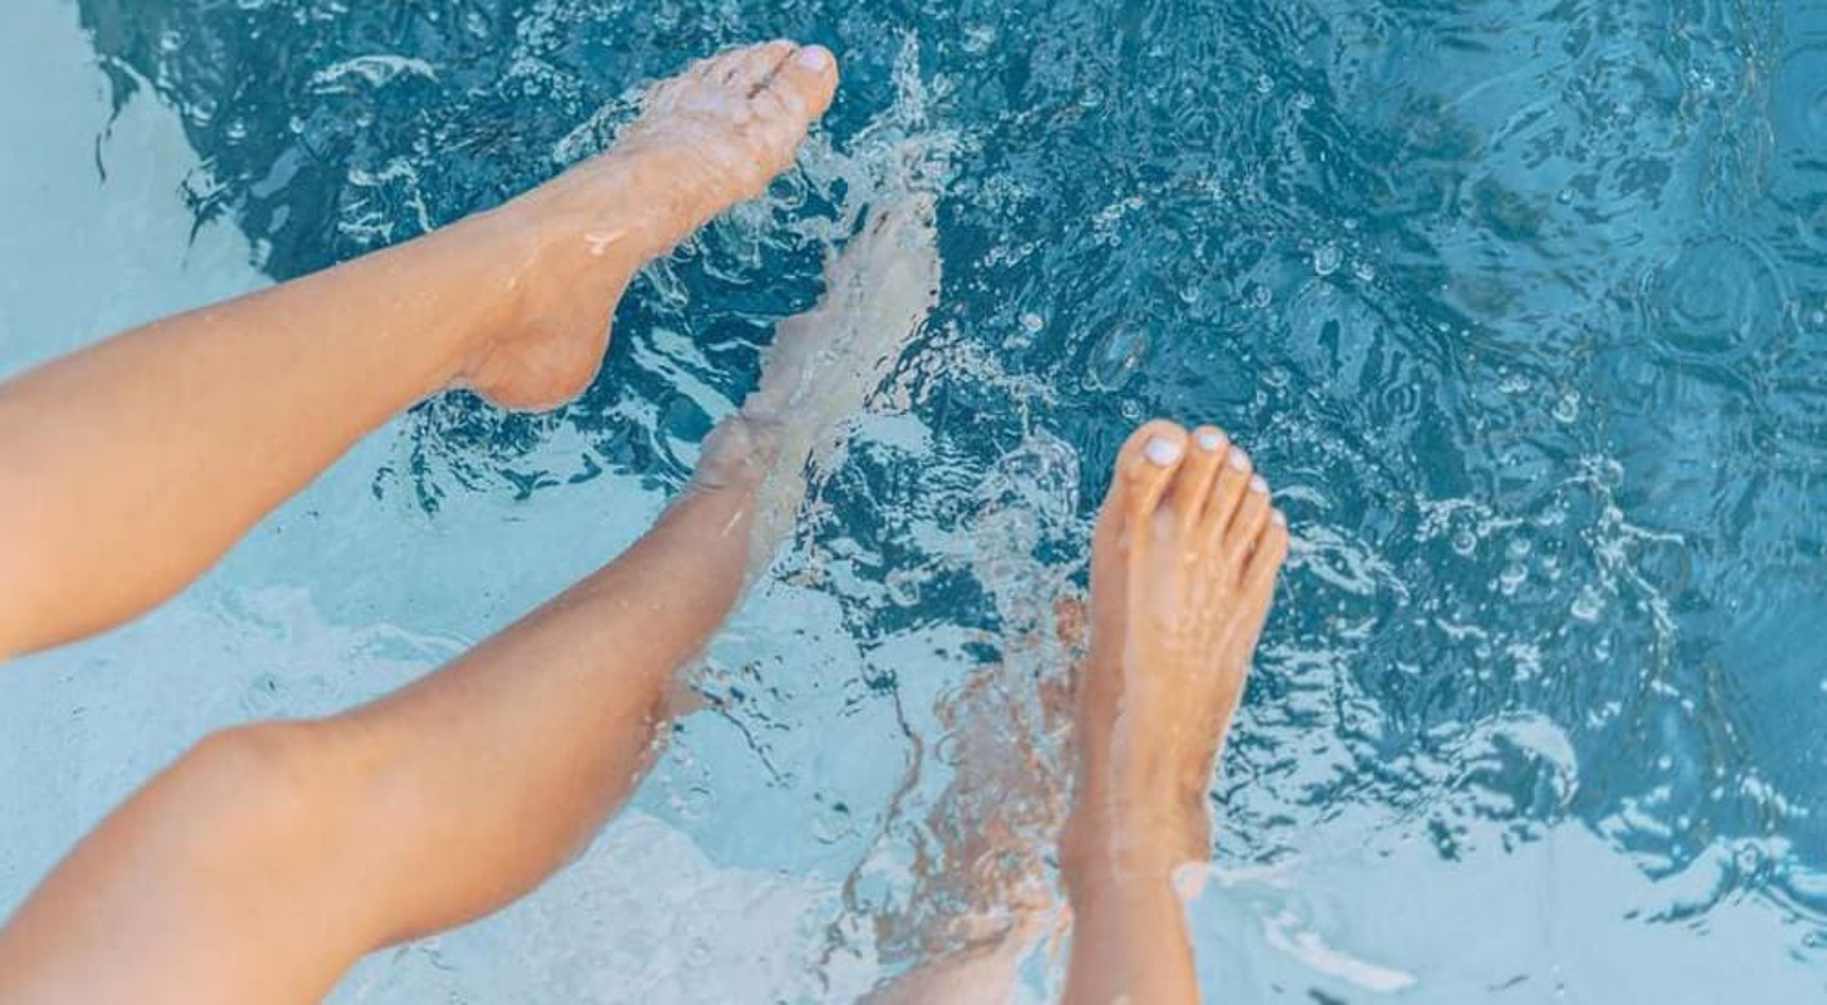 People's feet in a pool